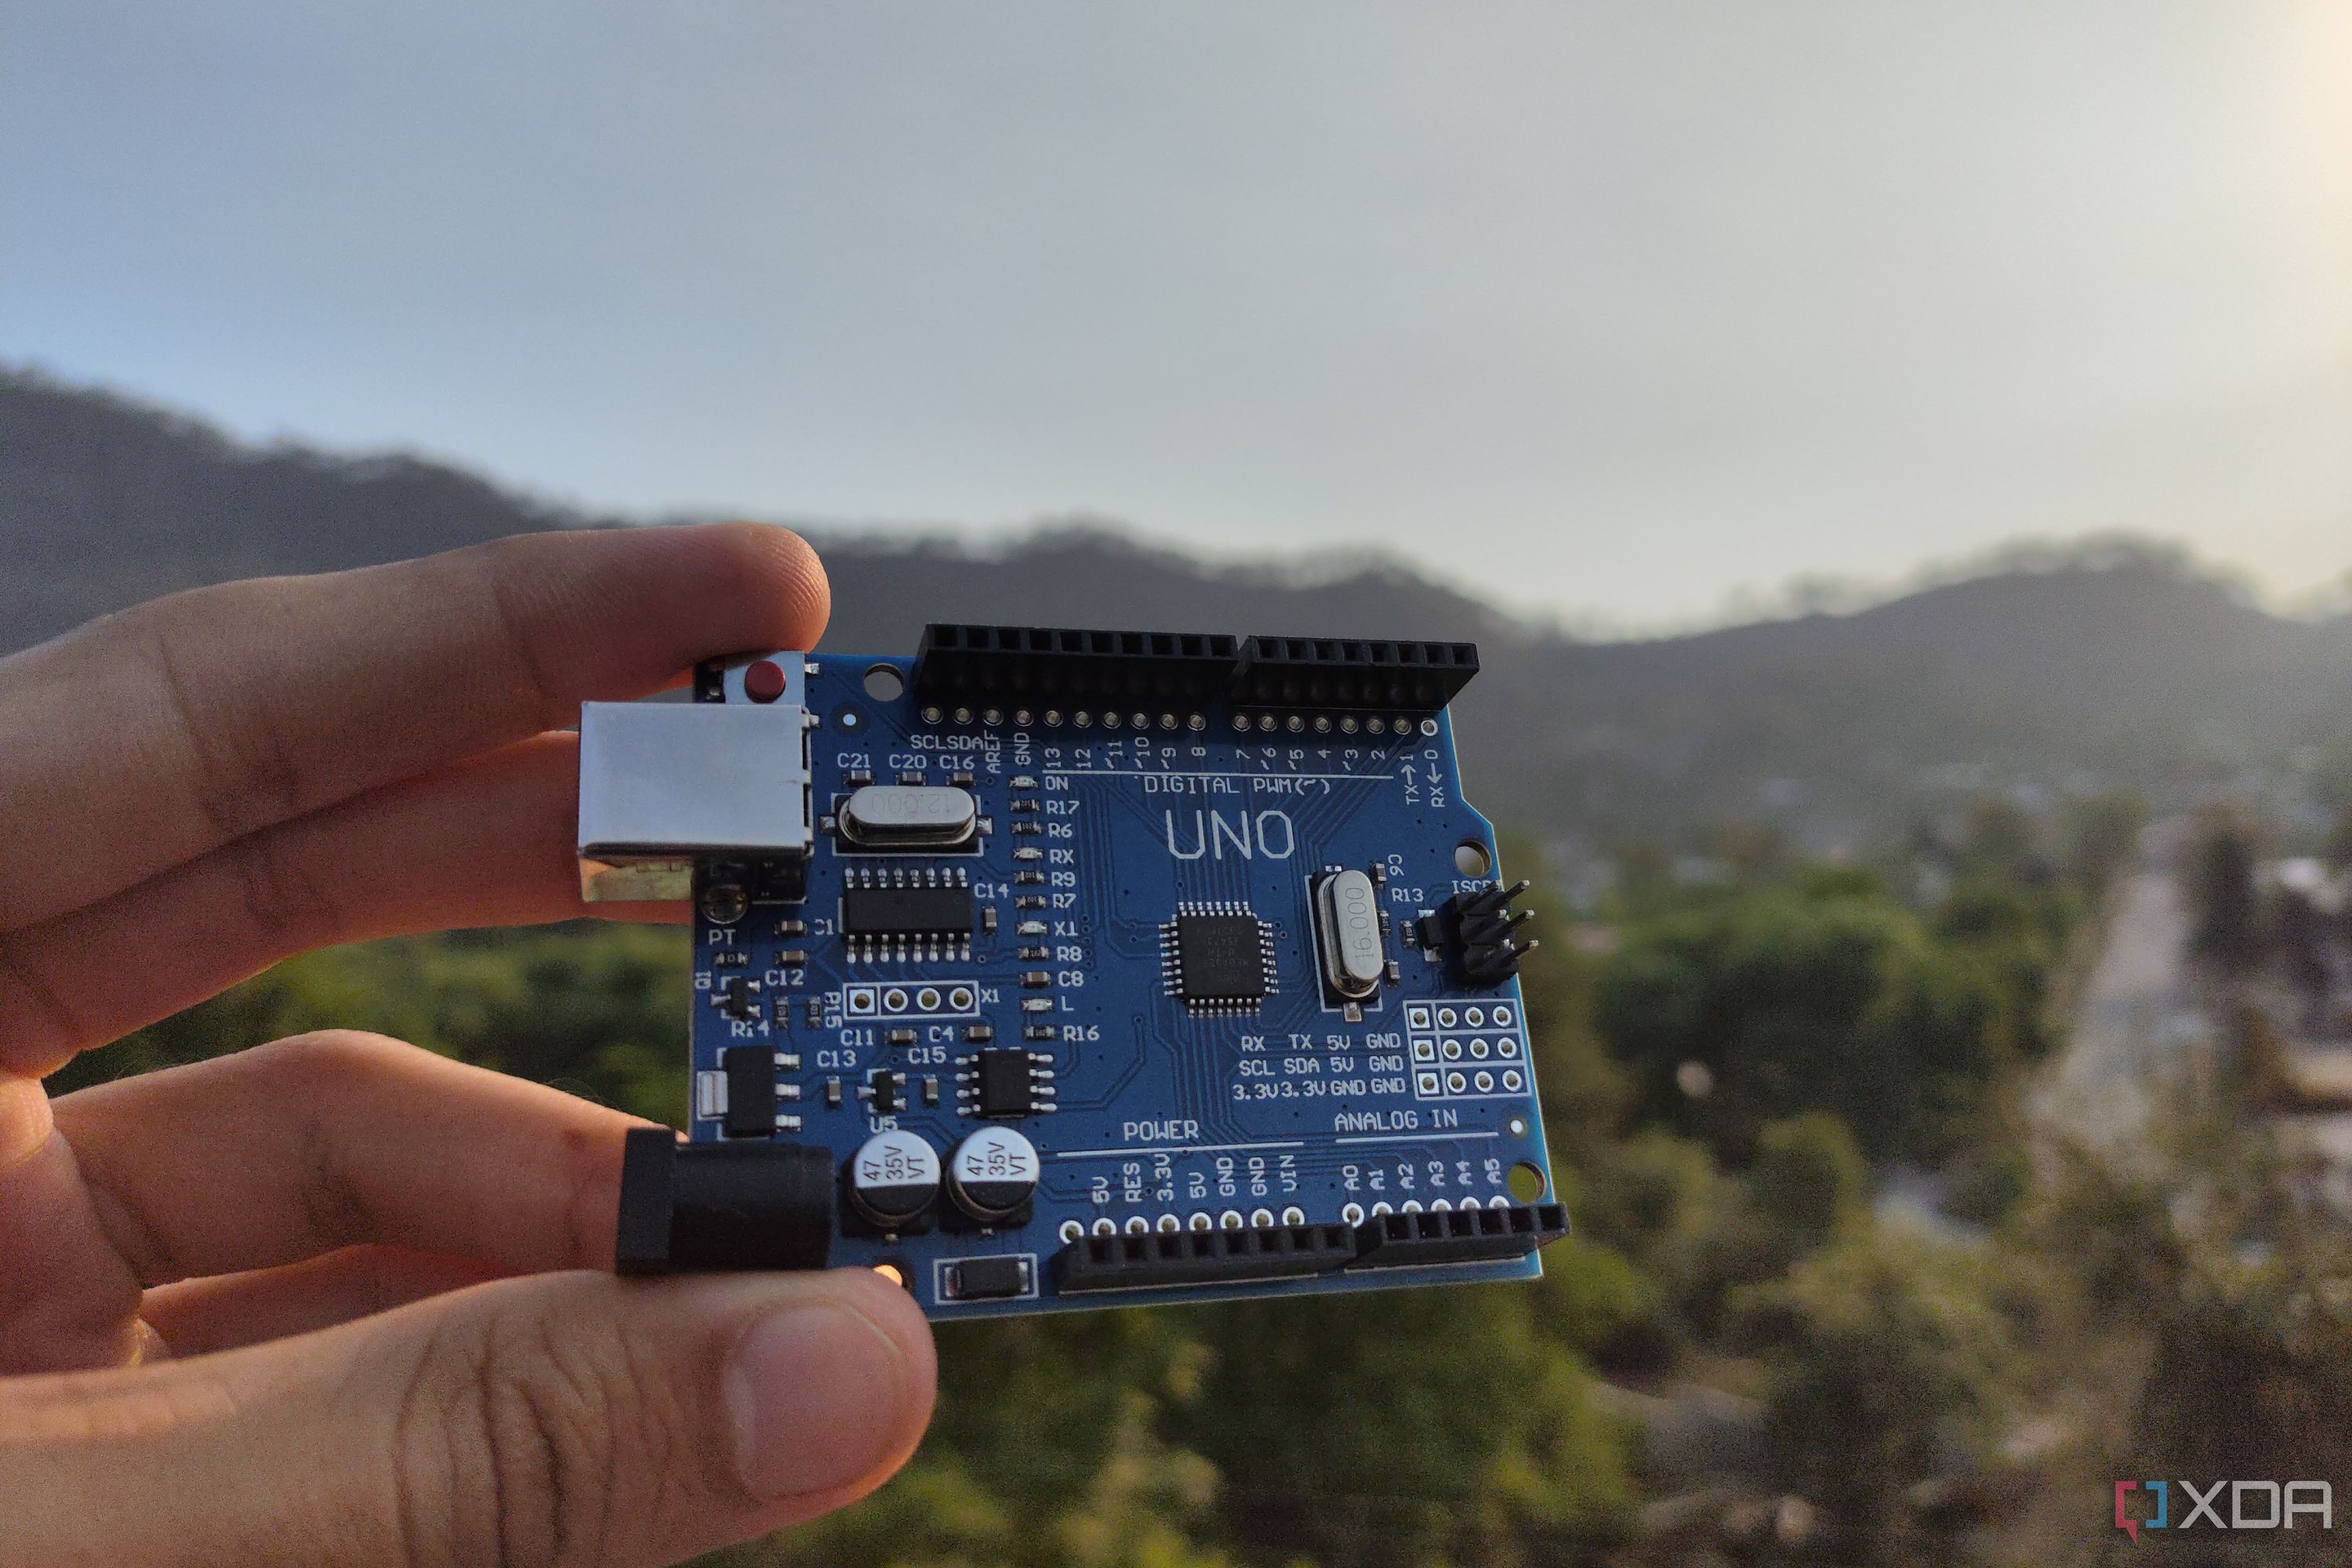 An image of the Arduino Uno